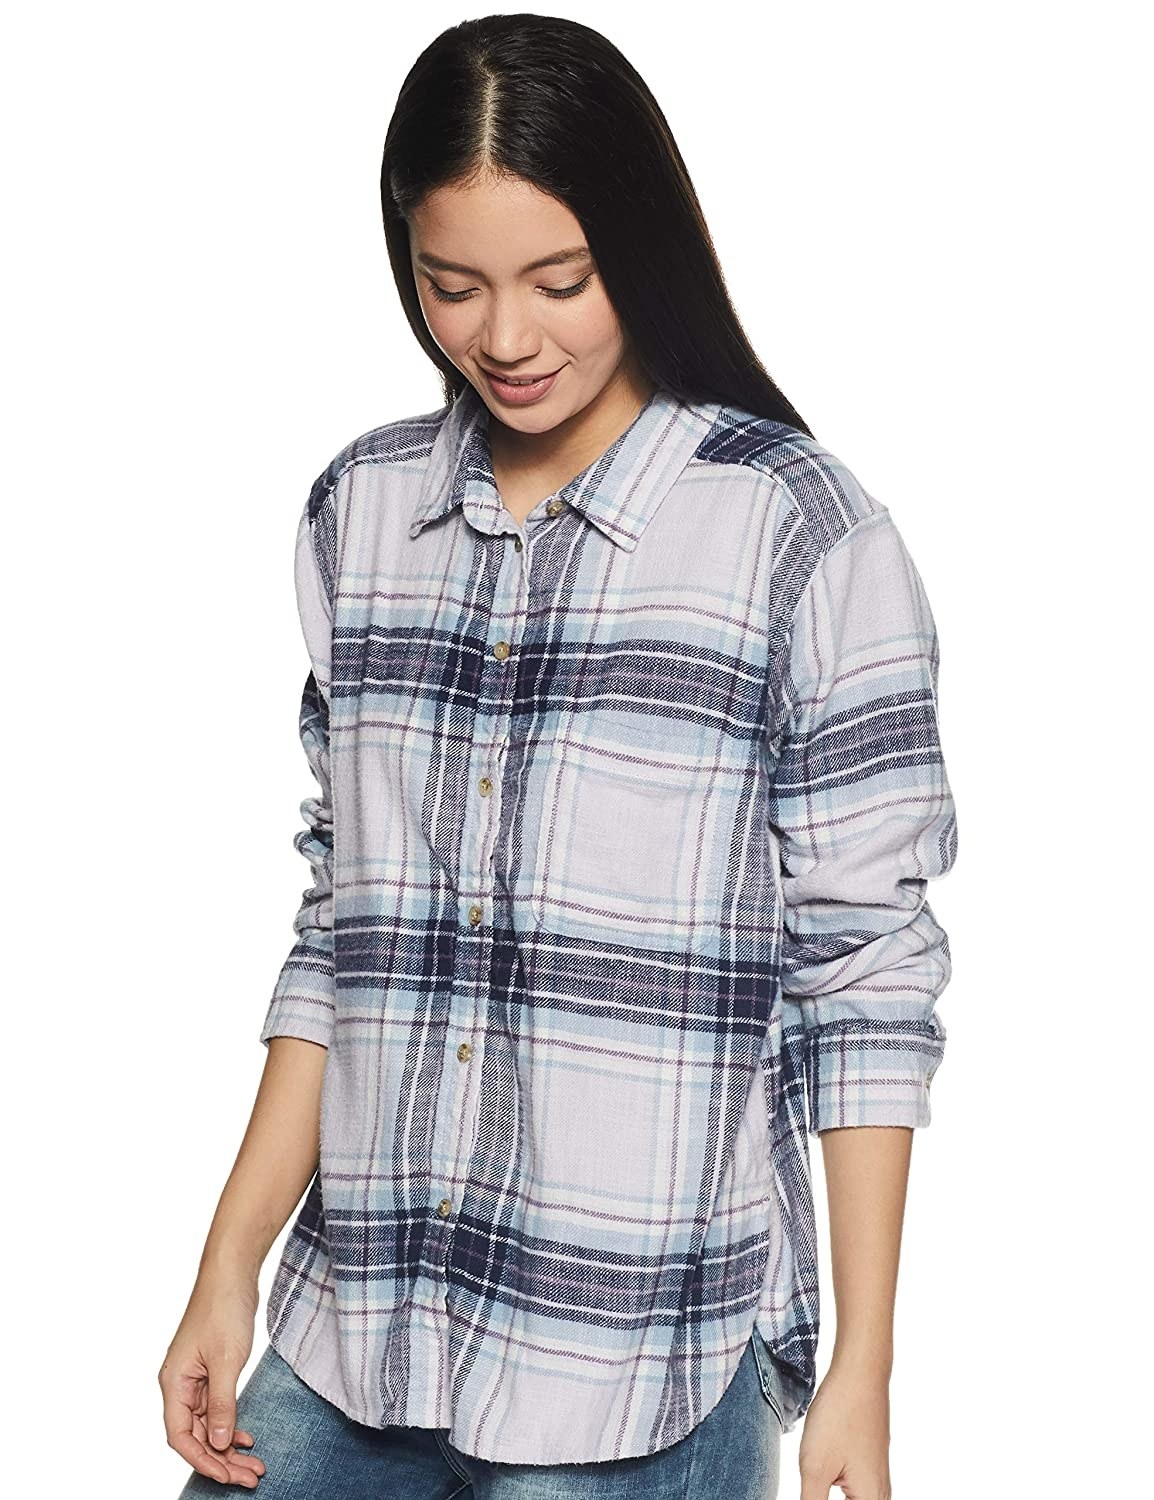 A model wearing a blue and white flannel shirt with broad checkers.